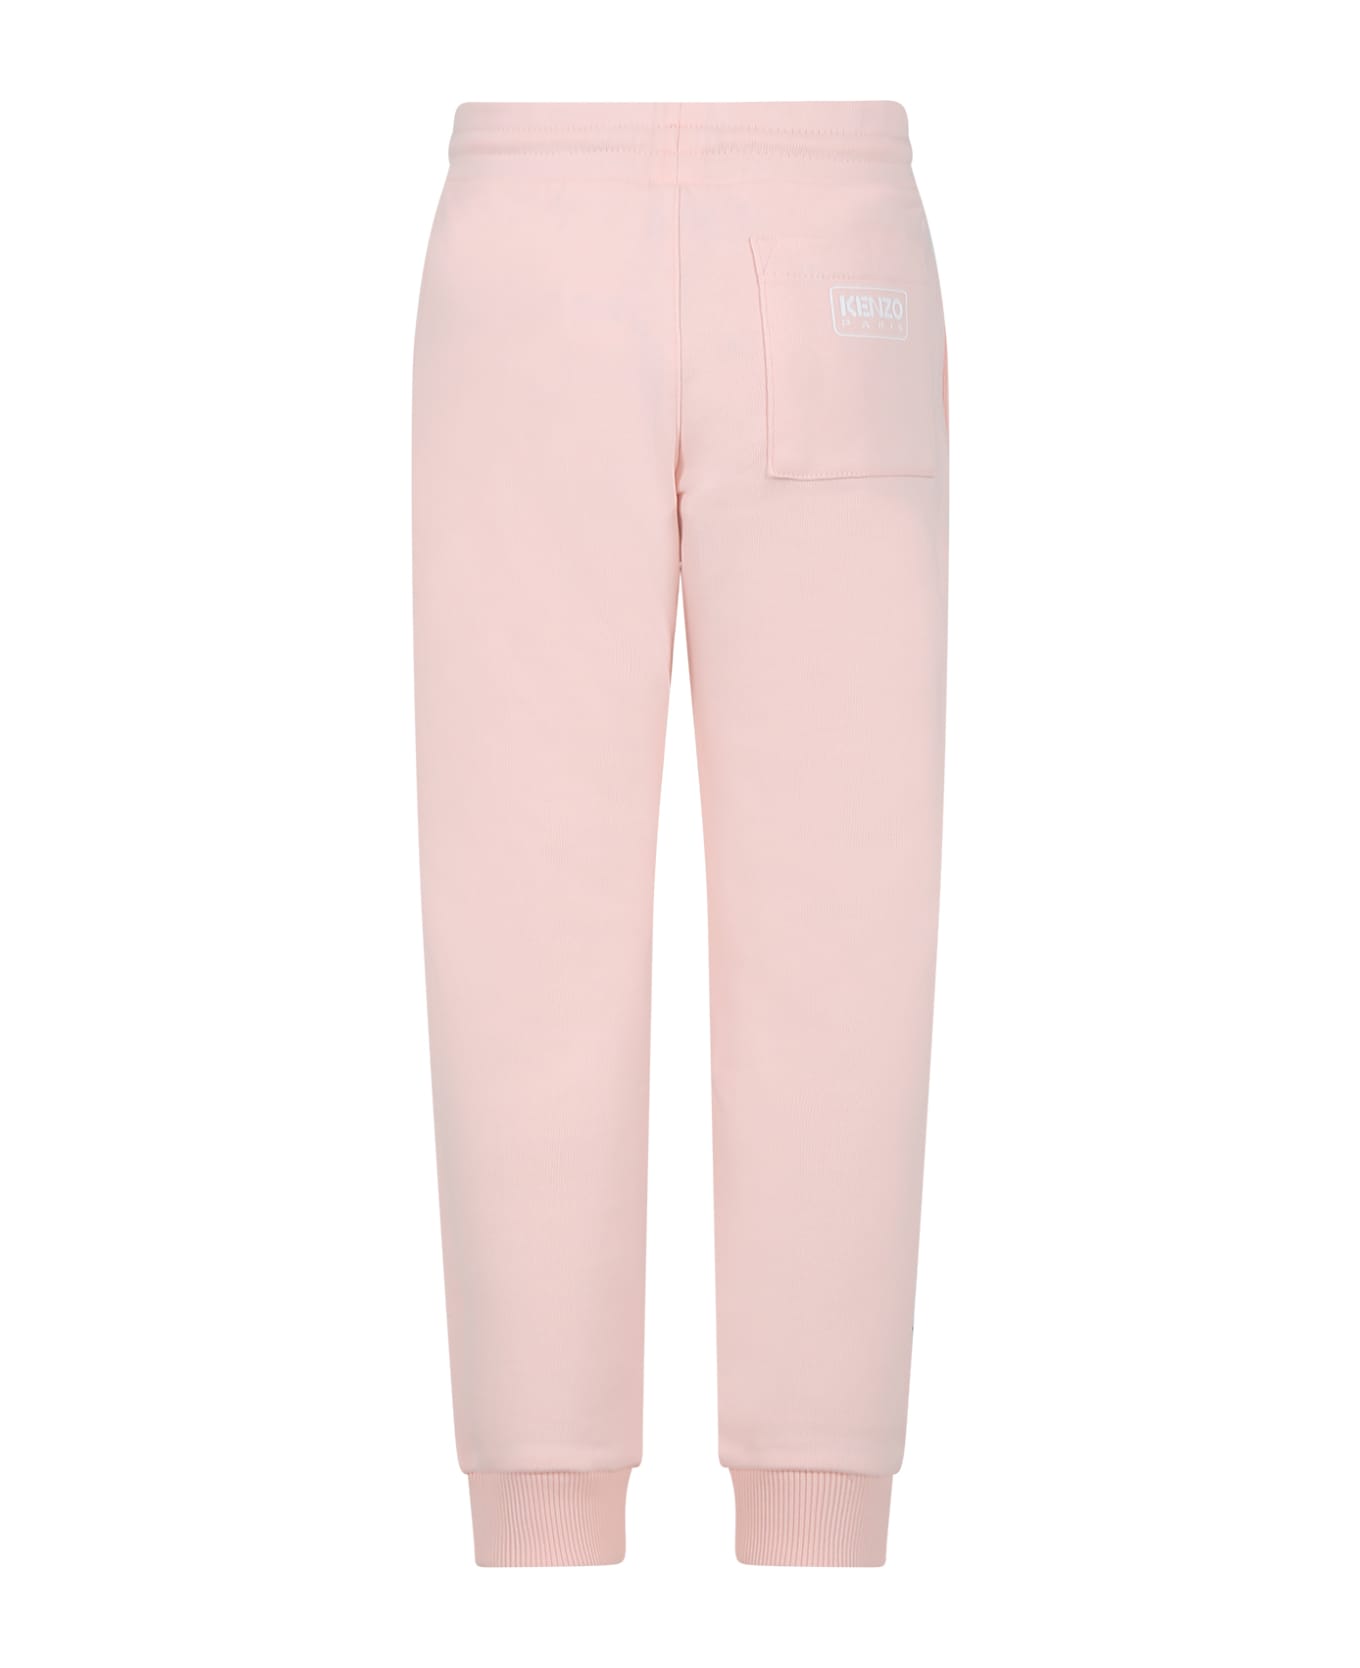 Kenzo Kids Pink Trousers For Girl With Logo - Pink